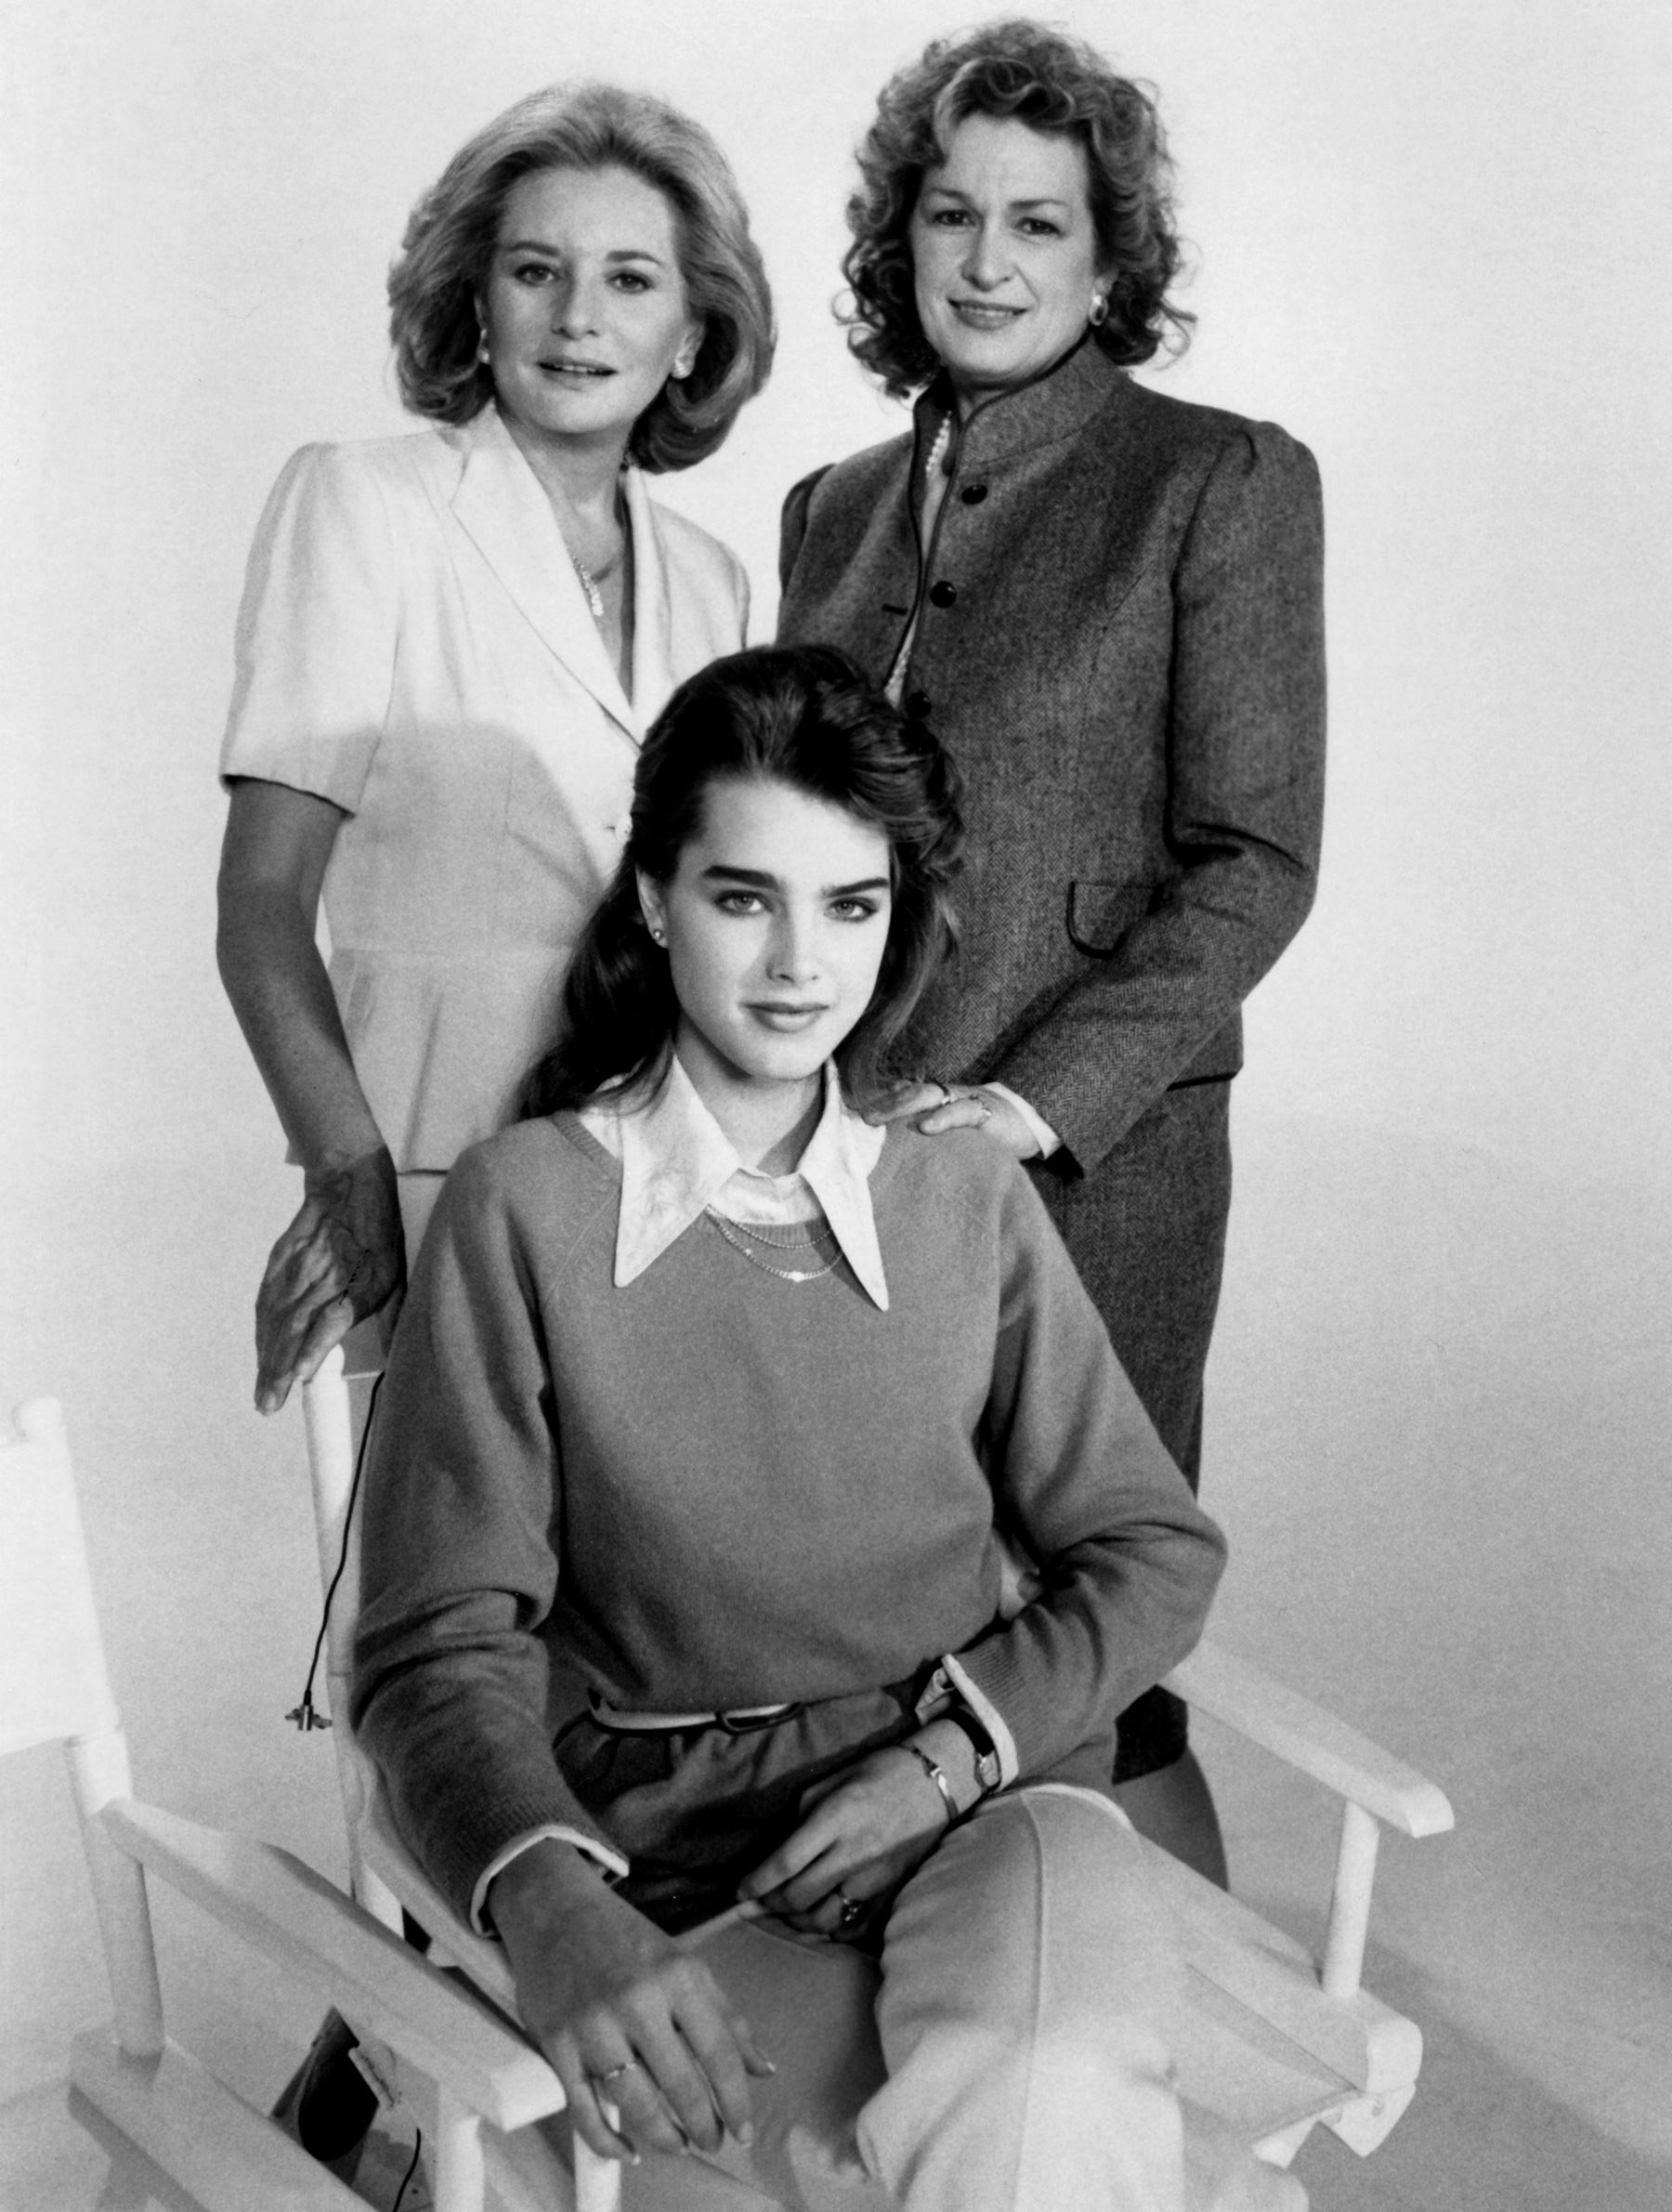 Brooke sits in a chair while Barbara and her mother stand behind her